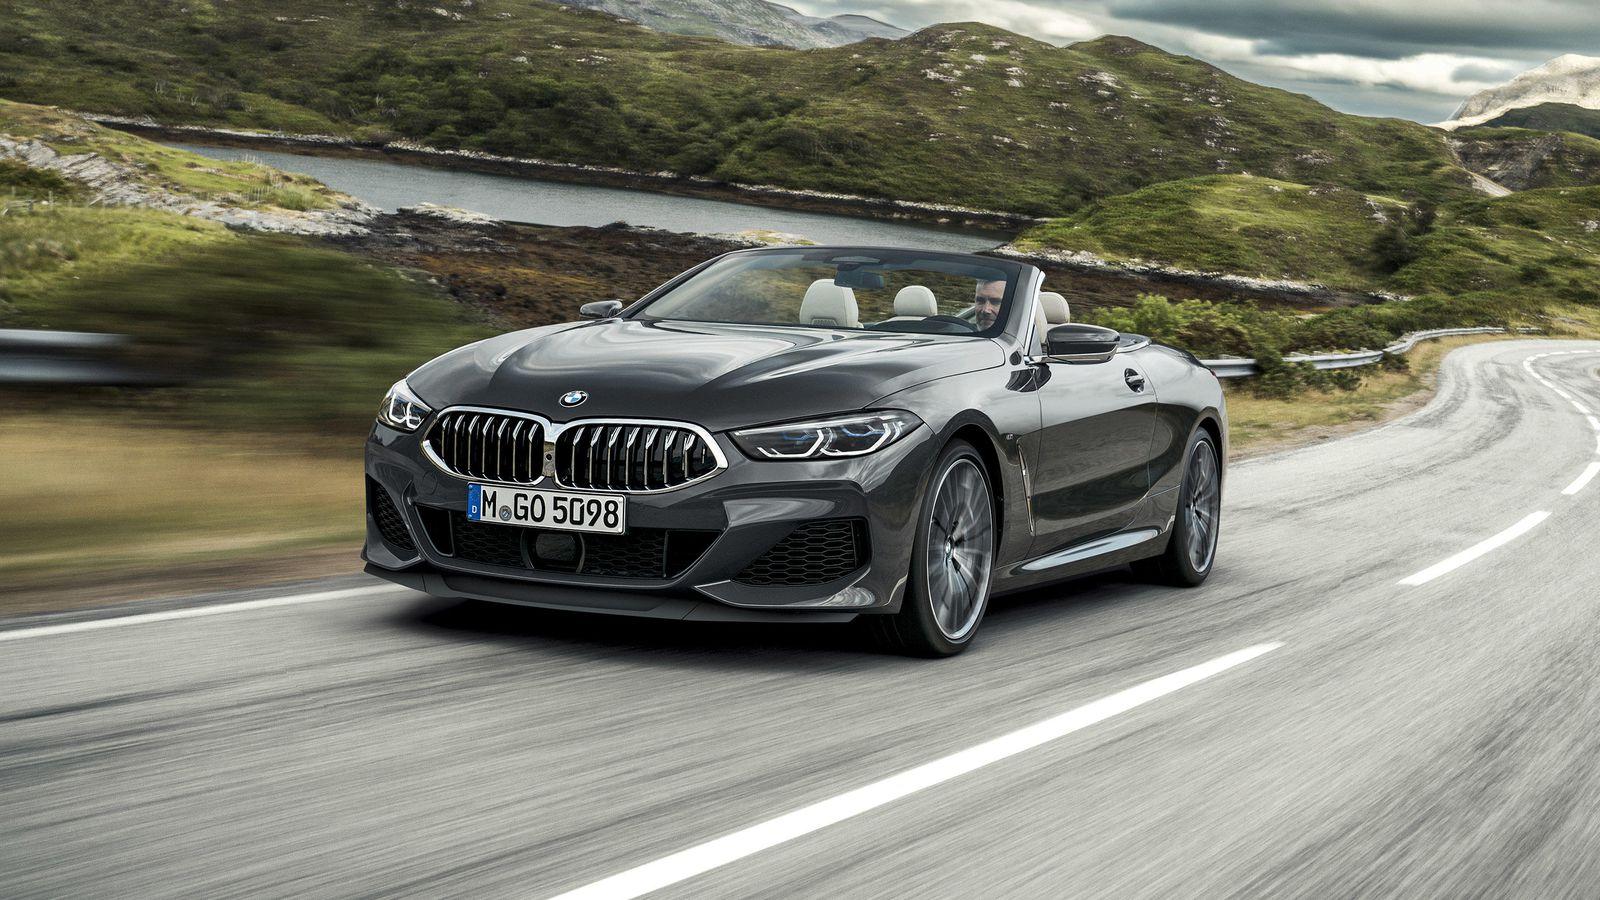 BMW's 8 Series Convertible is $121K sunny day real estate